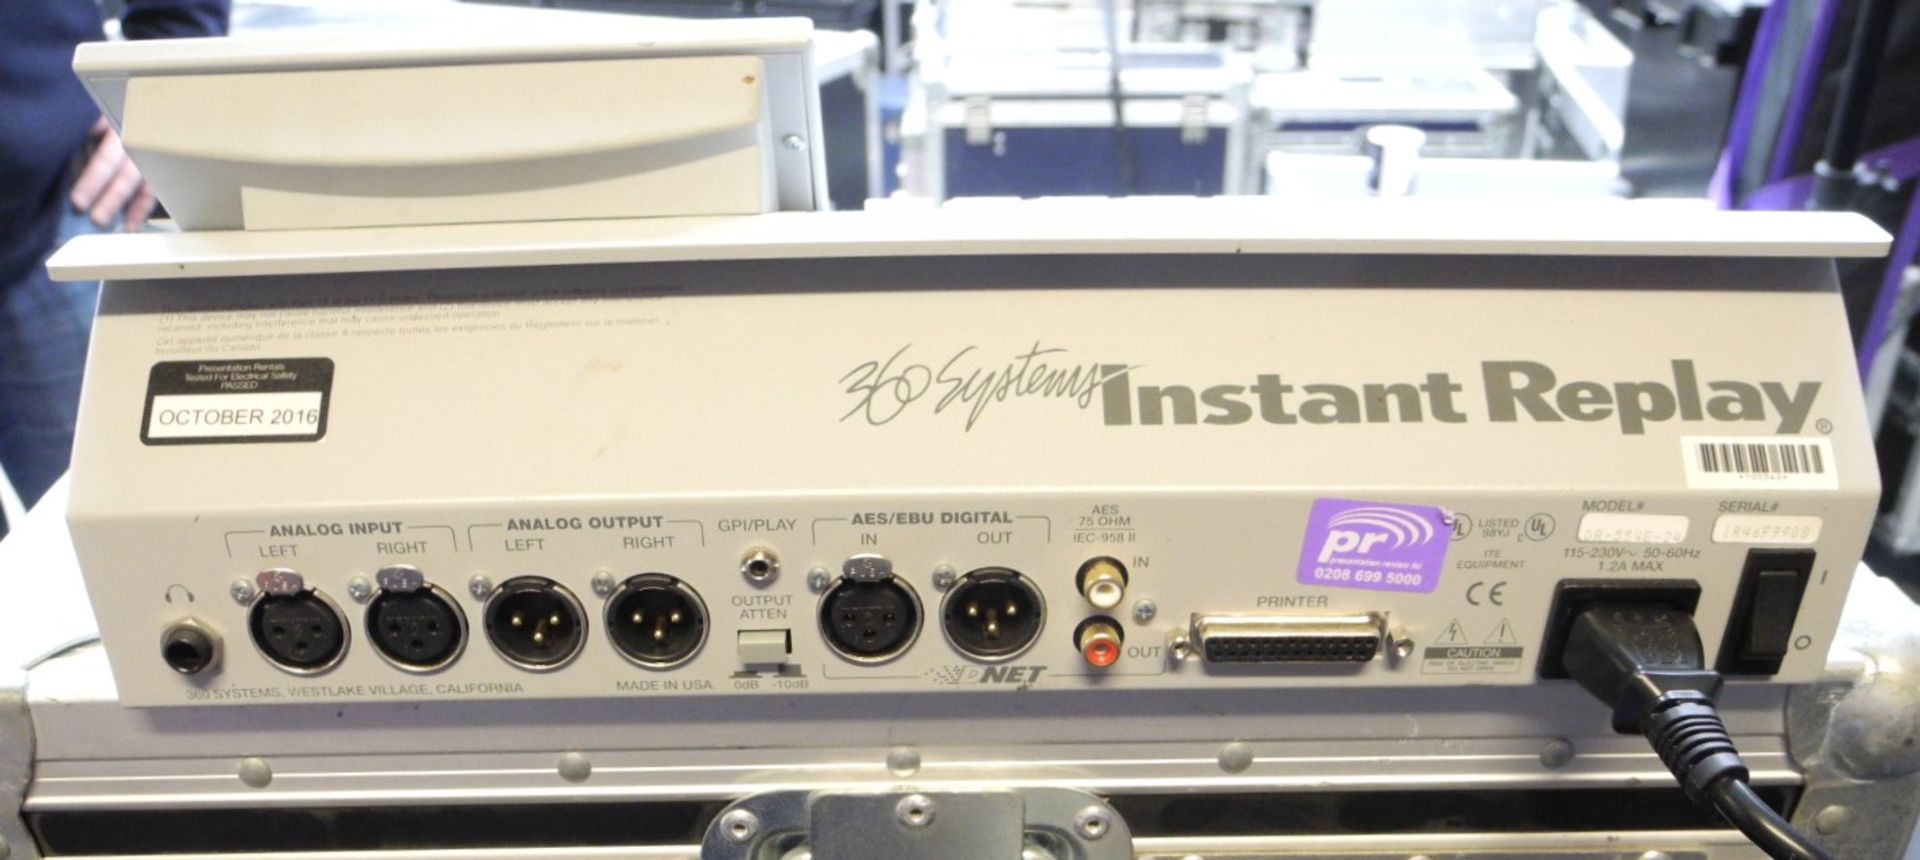 A 360 Systems Instant Replay Audio Clip/Sting Playback Server Device in flight case, full working - Image 2 of 3